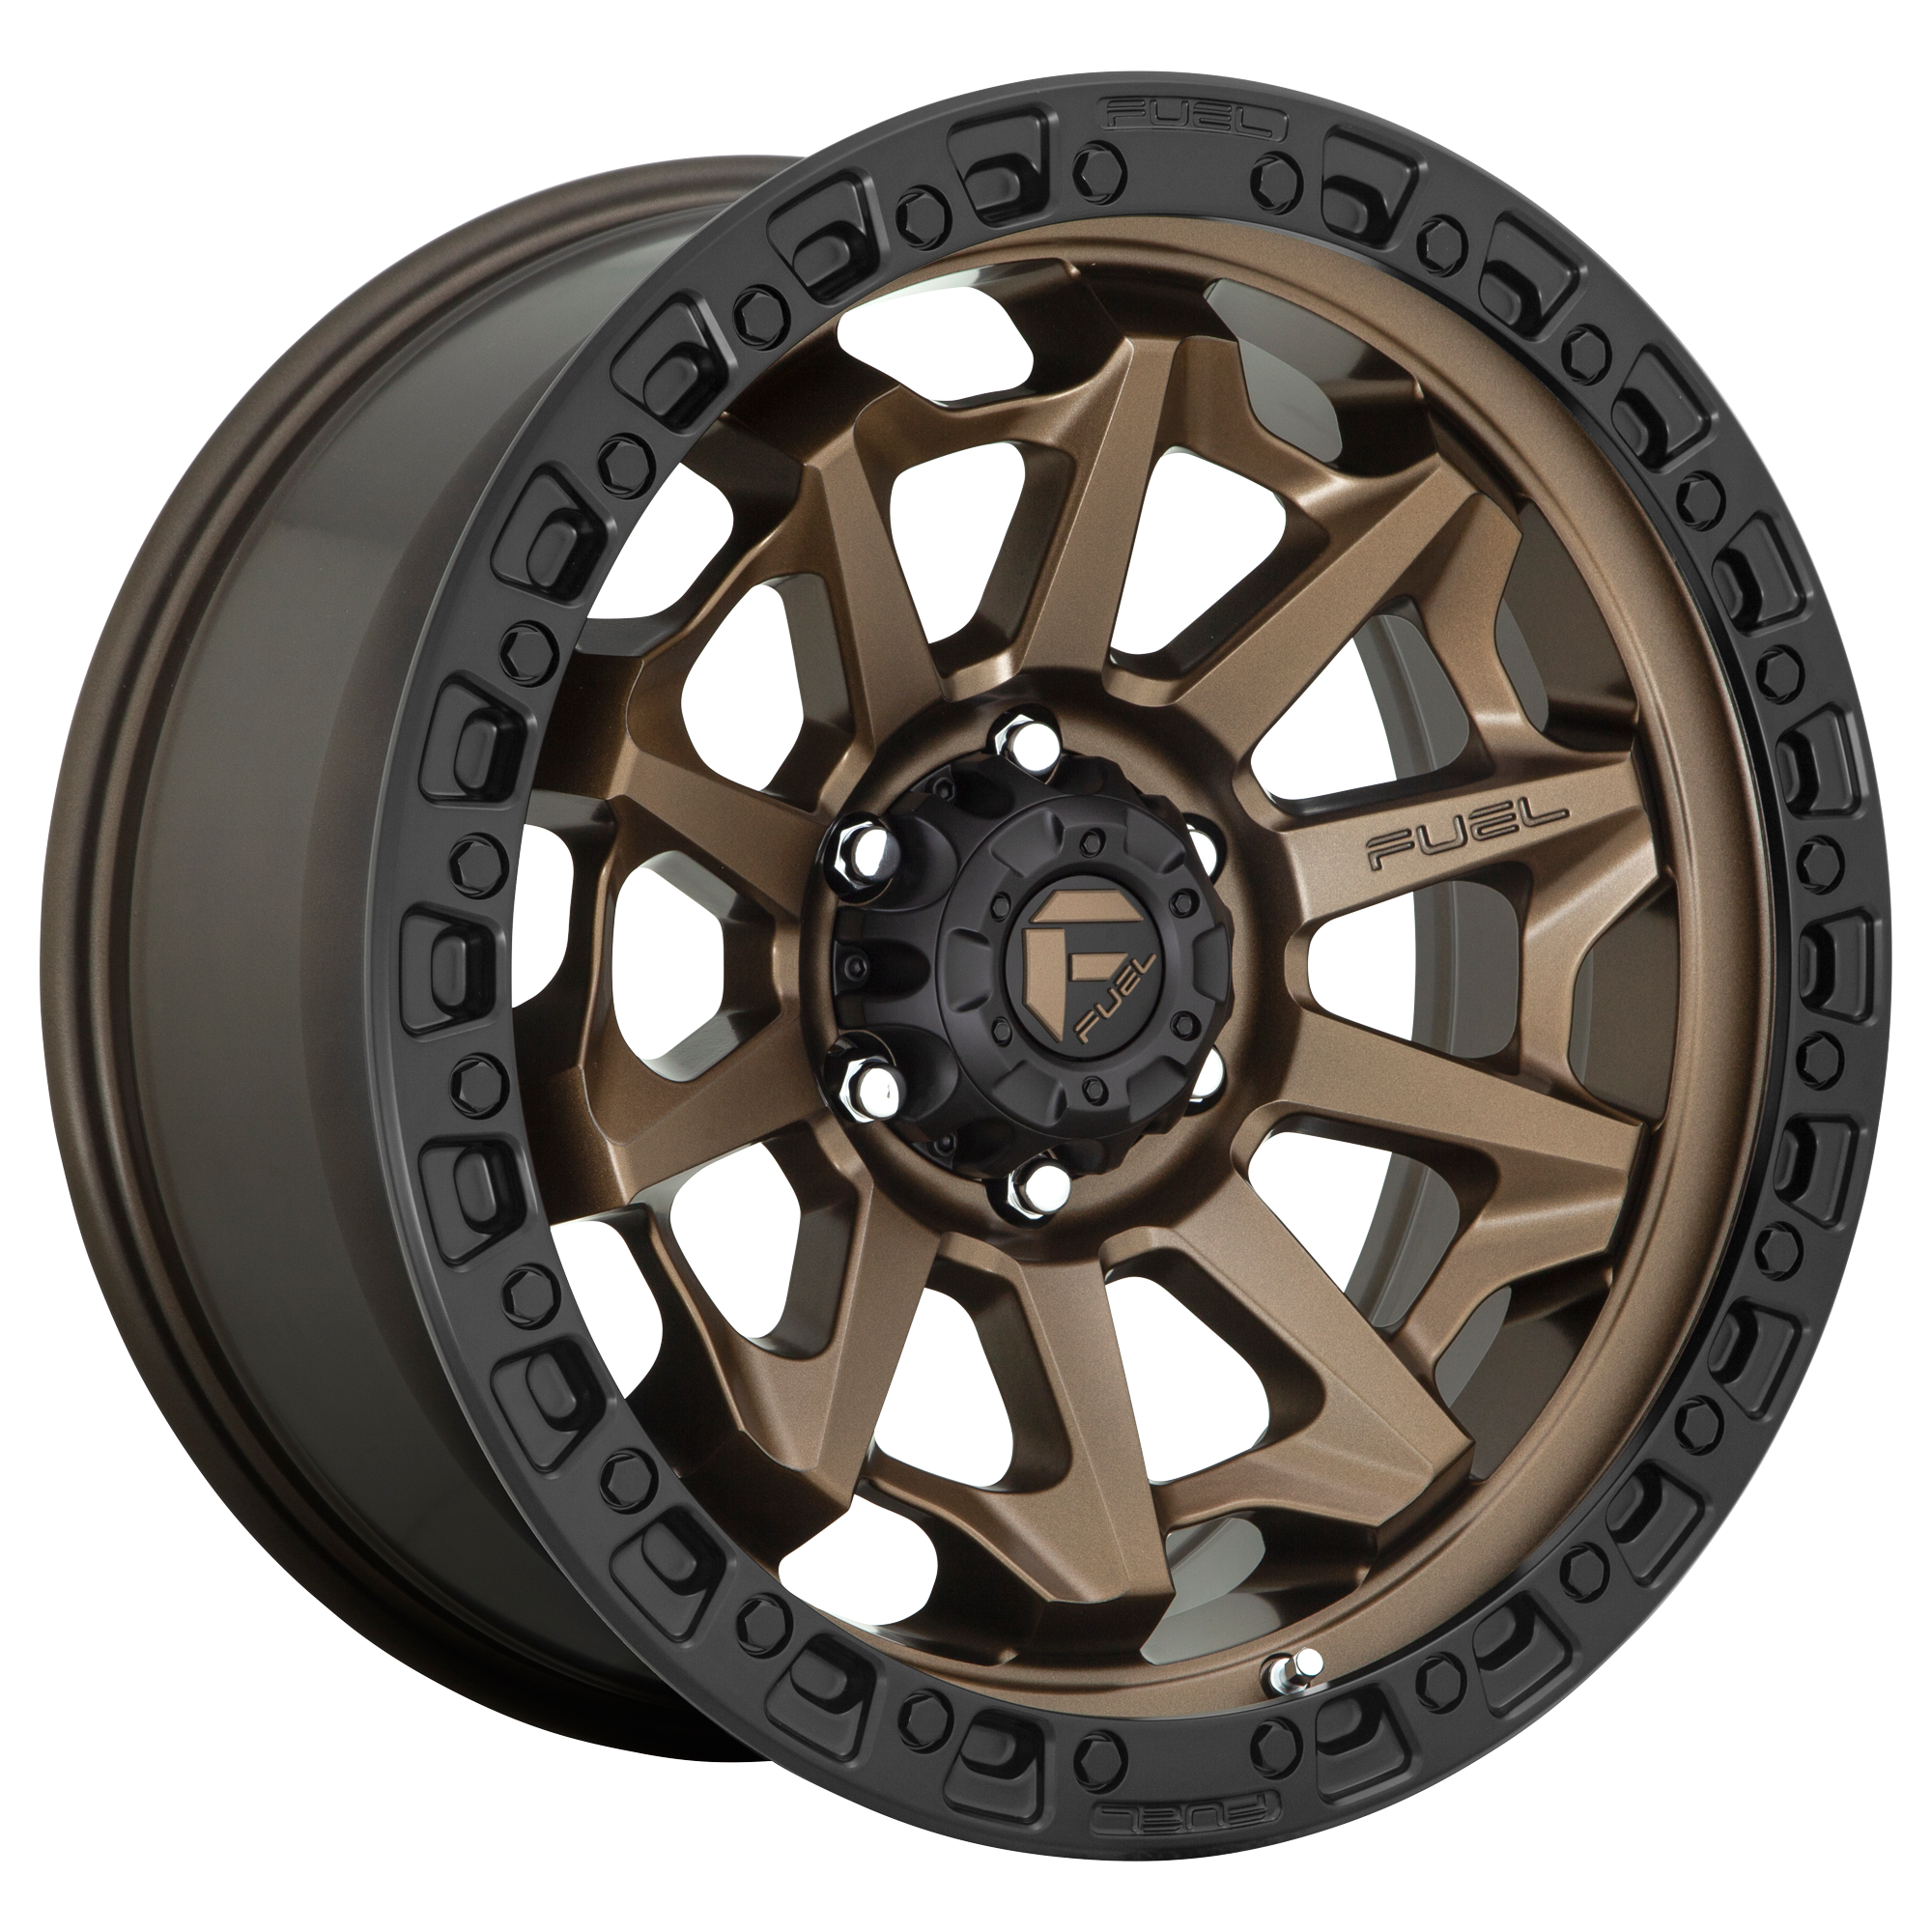 COVERT 18x9 6x135.00 MATTE BRONZE BLACK BEAD RING (1 mm) - Tires and Engine Performance